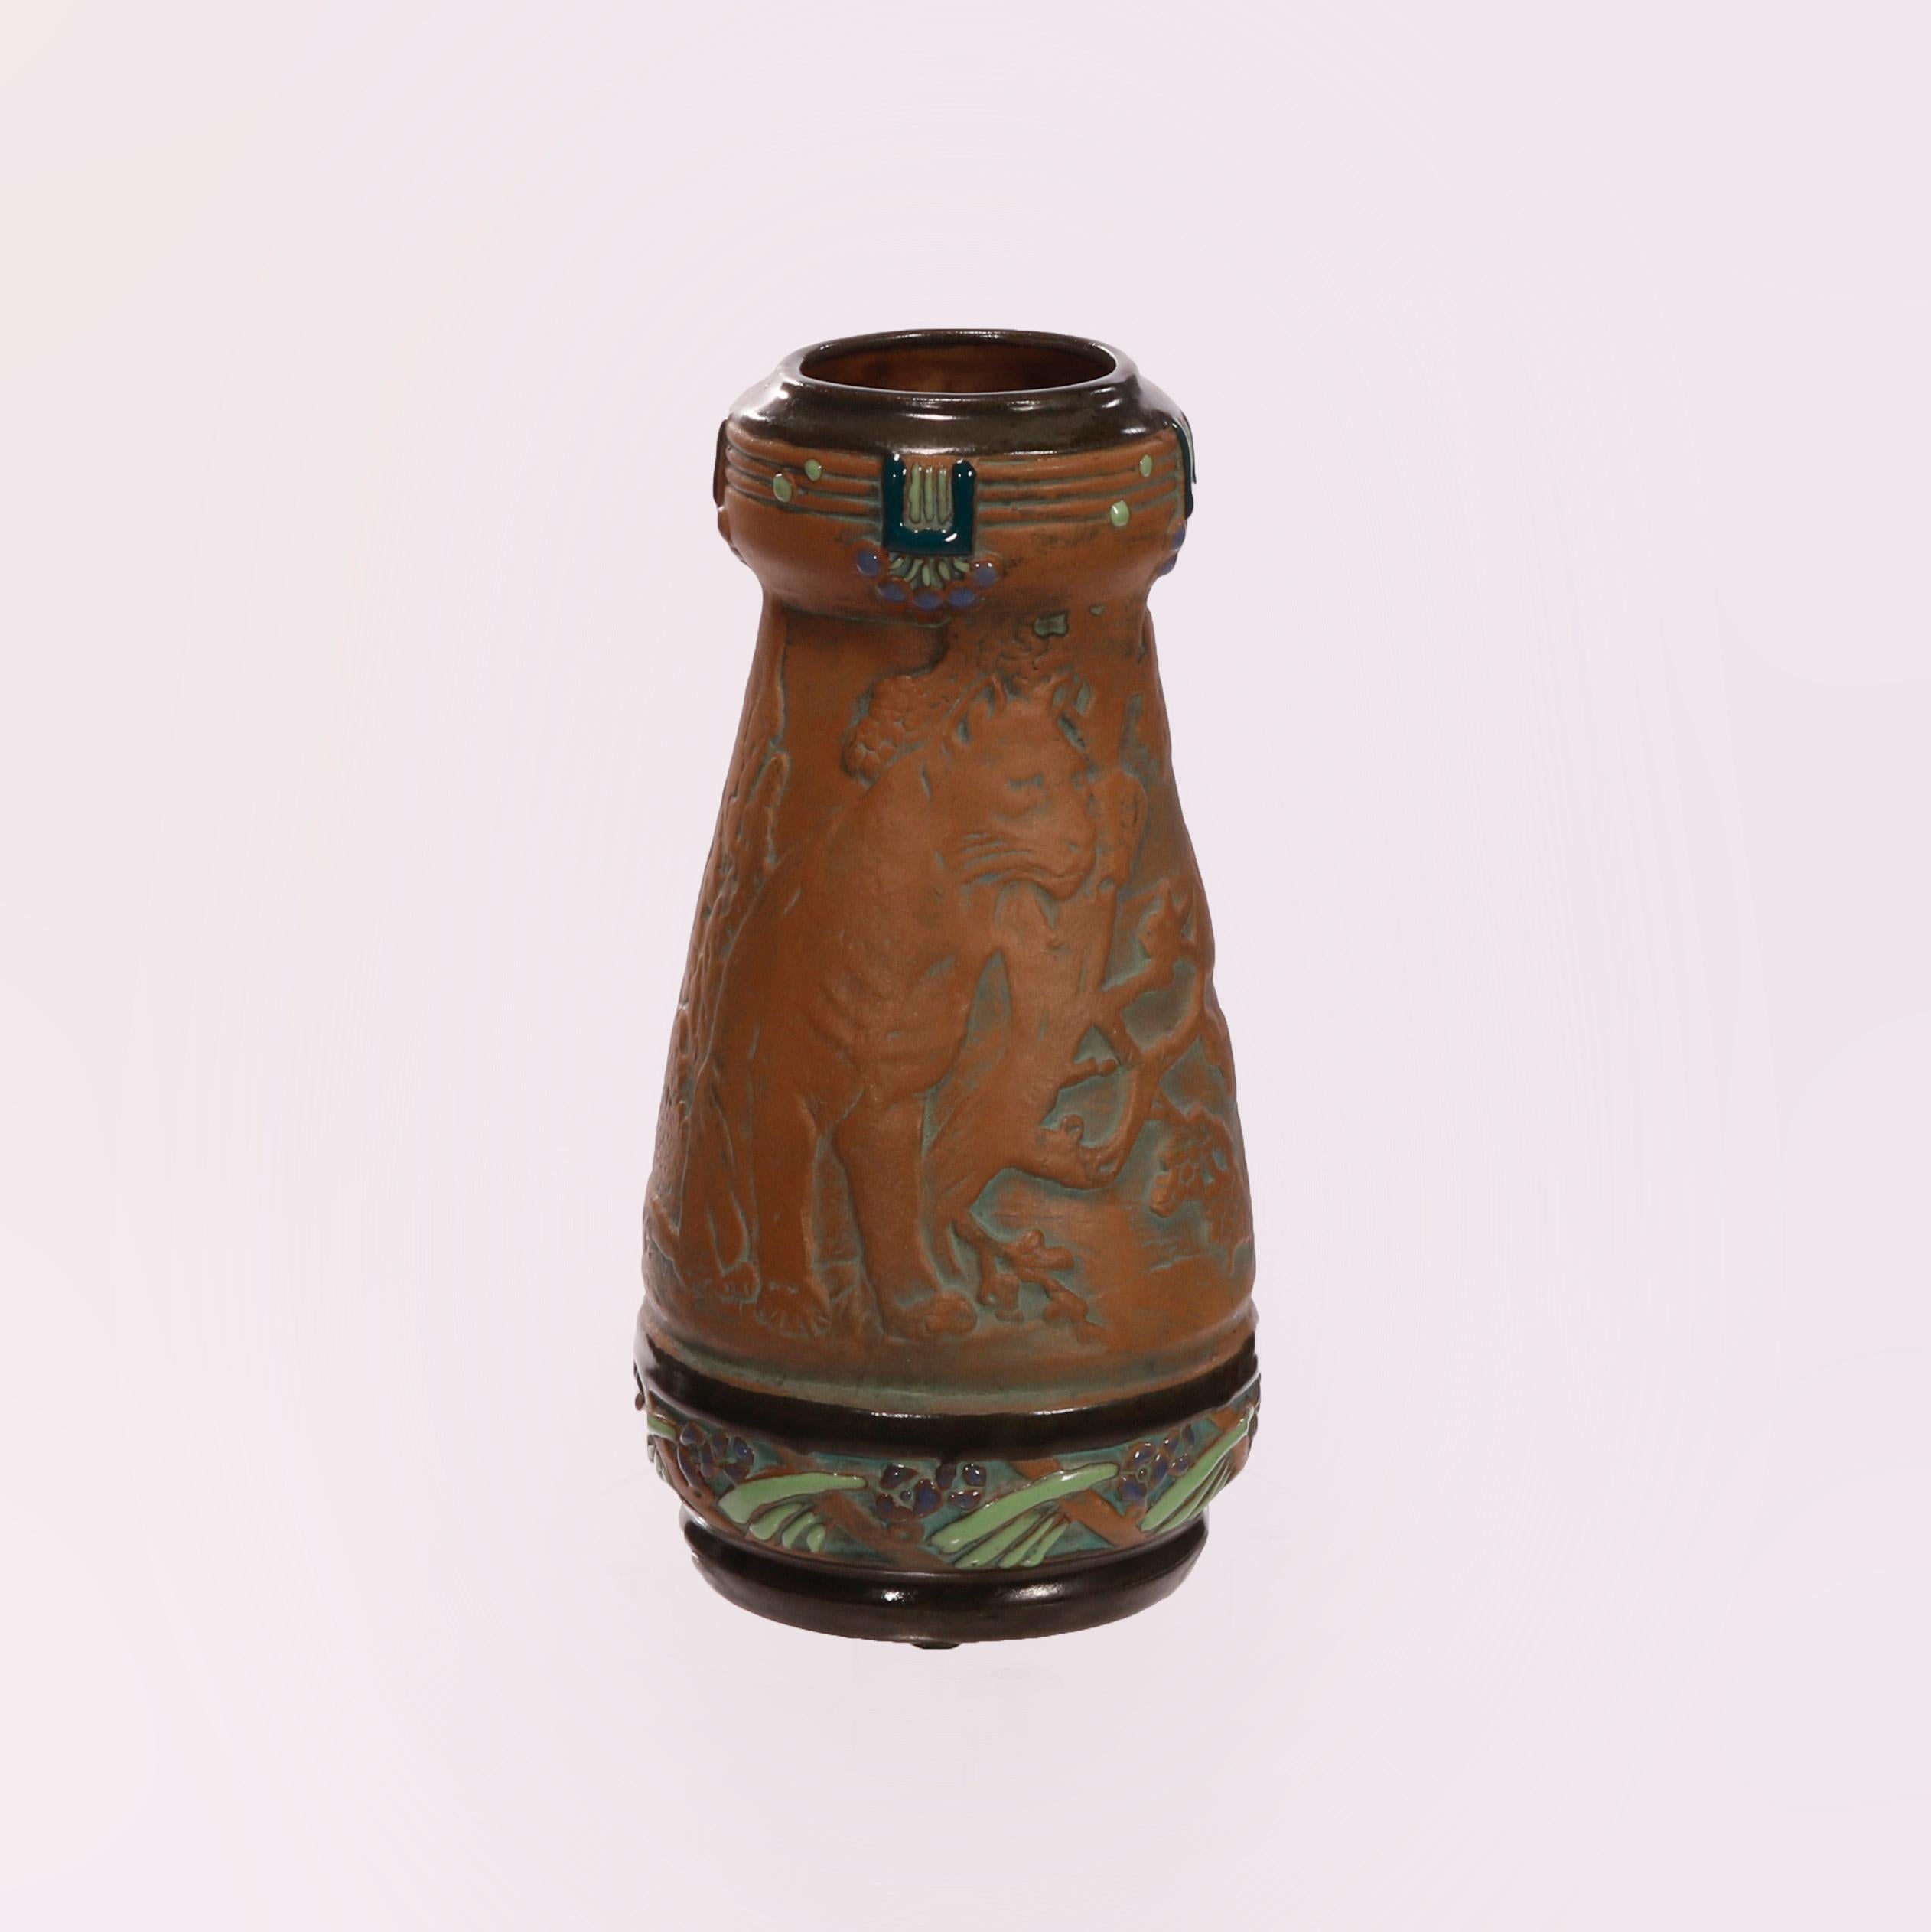 An antique Arts & Crafts vase offers Amphora pottery construction with a wild cat in countryside setting carved in relief, polychromed band with enameled stylized foliate elements, marked on base as photographed, c1910

Measures - 9.25'' H x 4.75''